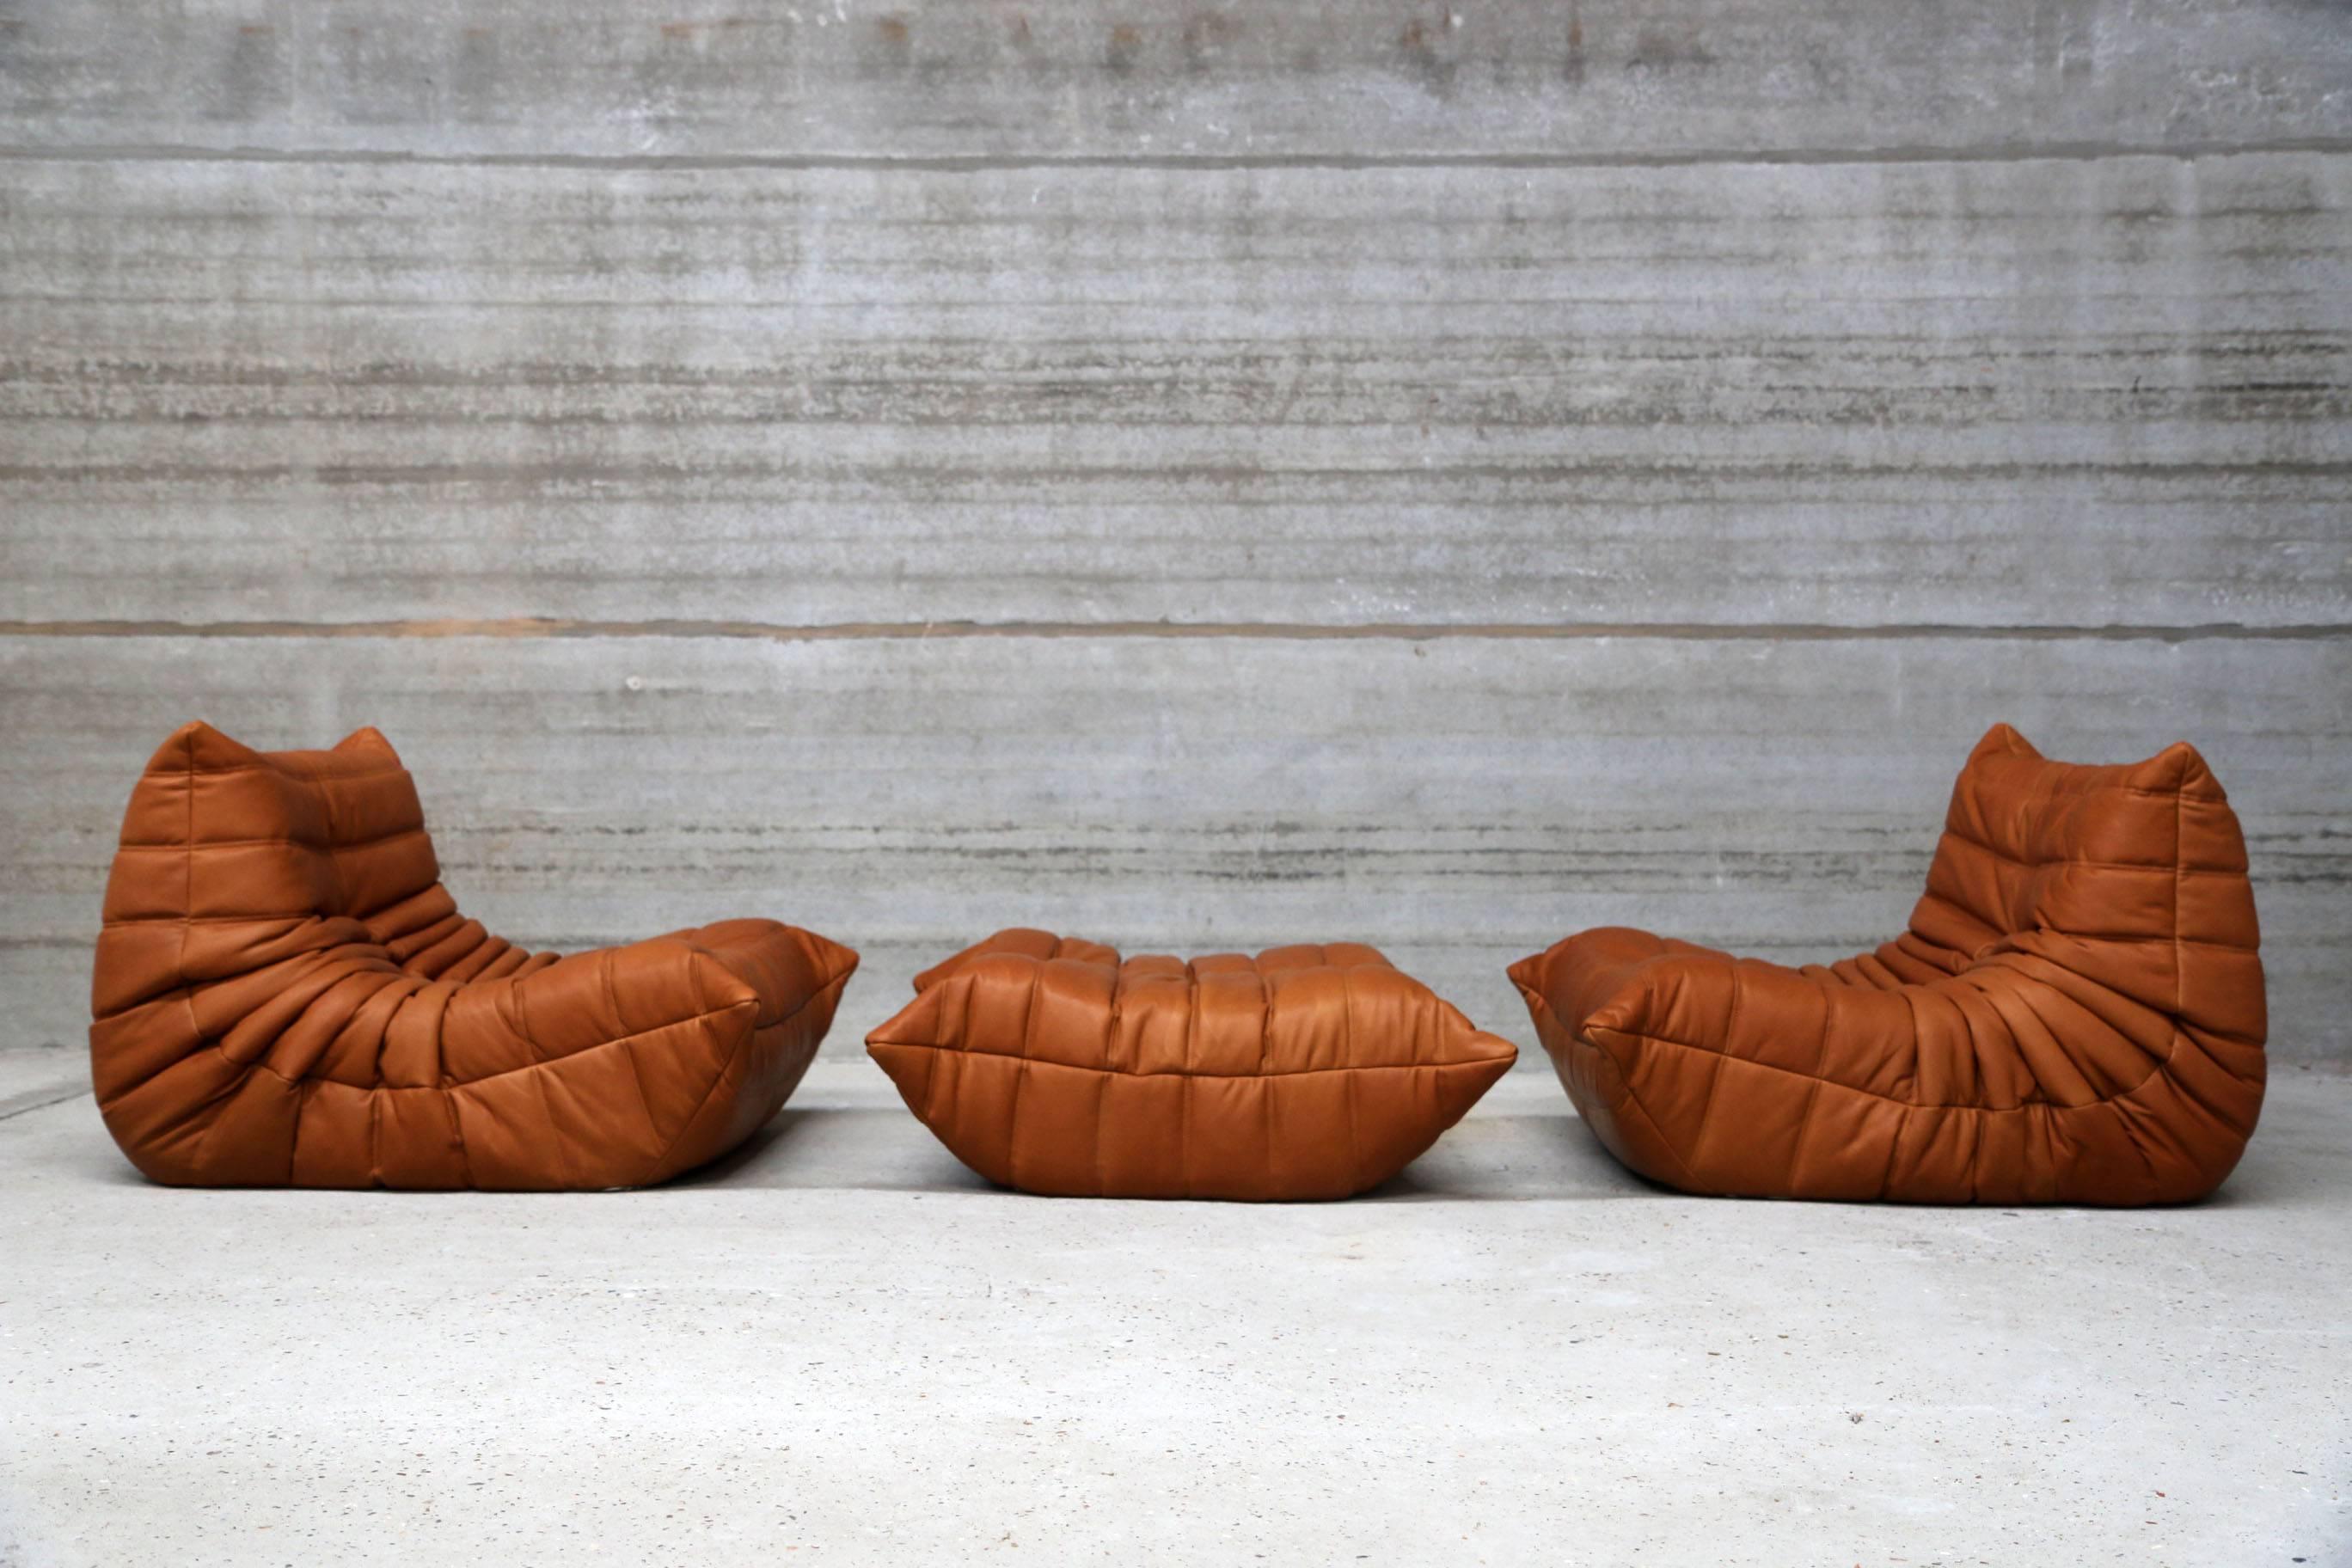 Two single seat lounge chairs and pouf, model Togo from Ligne Roset designed by Michel Ducaroy.
Re-upholstered in our signature full grain cognac leather. Our leather is biologically colored and feels warm and comfortable. Top